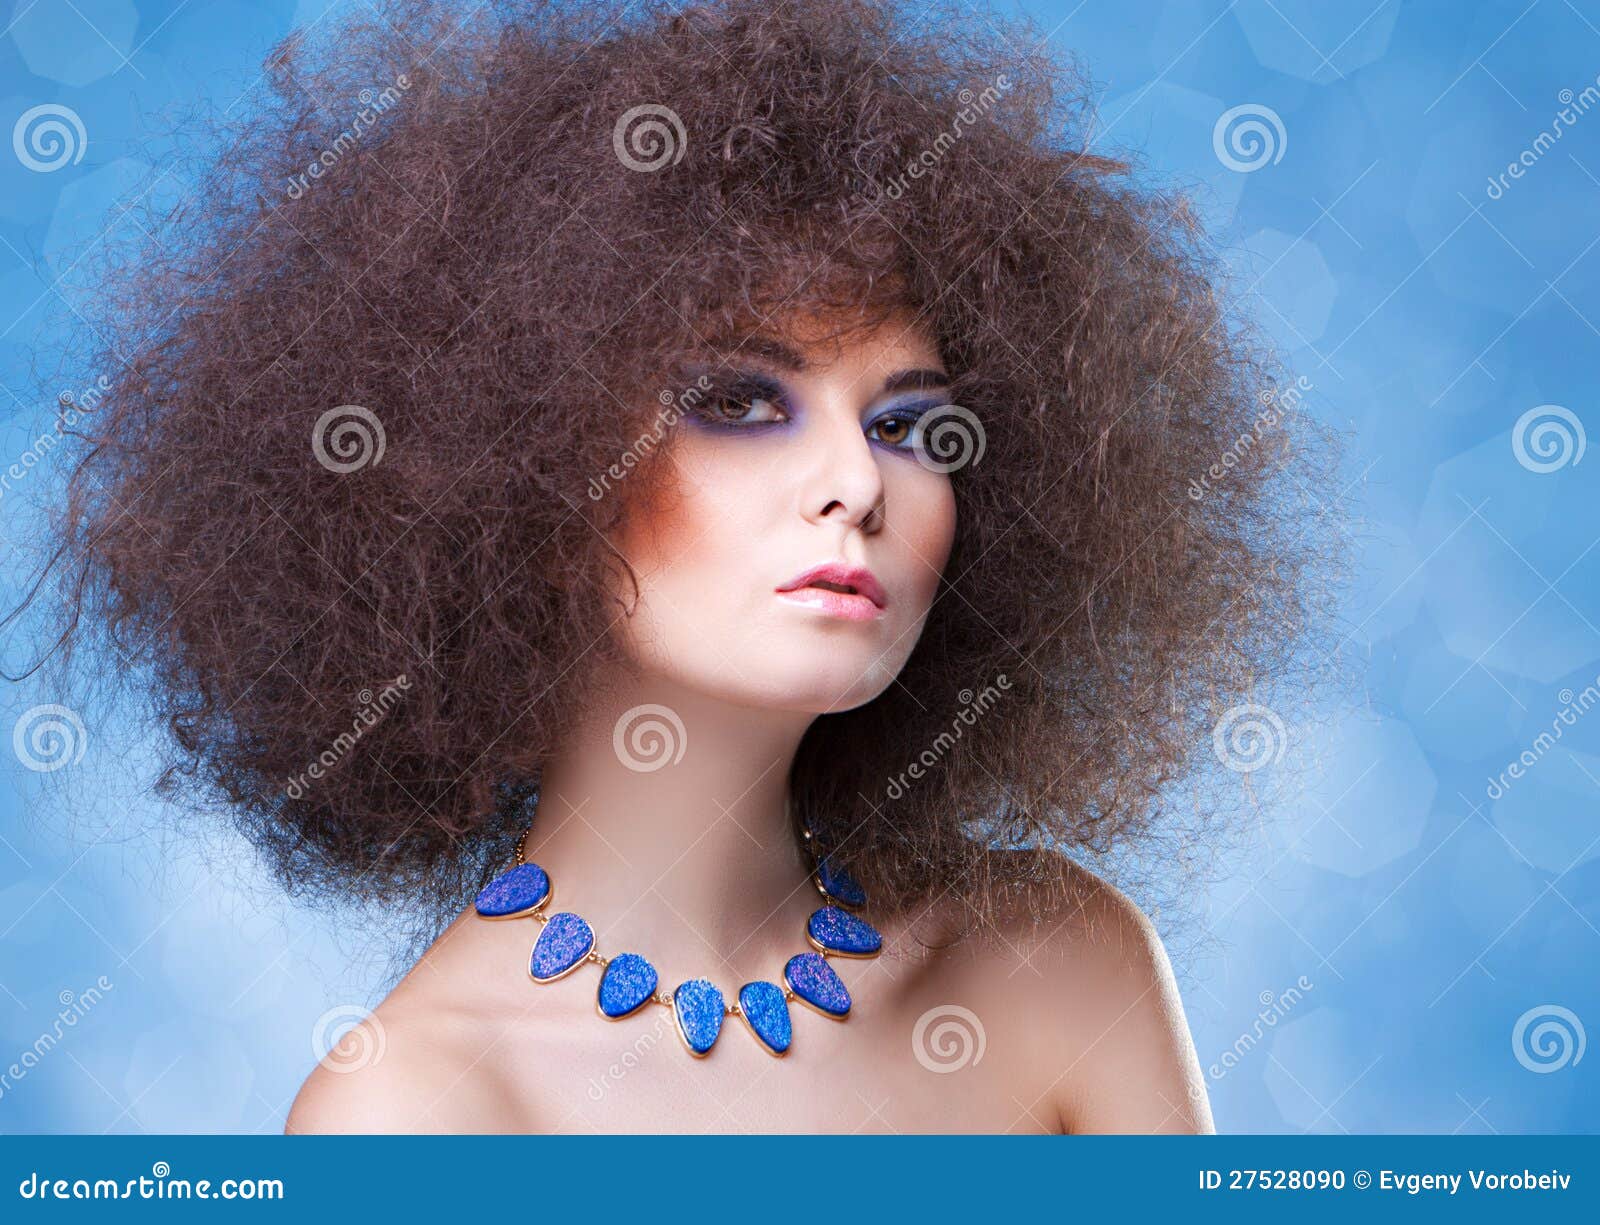 8. Blue eye makeup for curly hair - wide 5